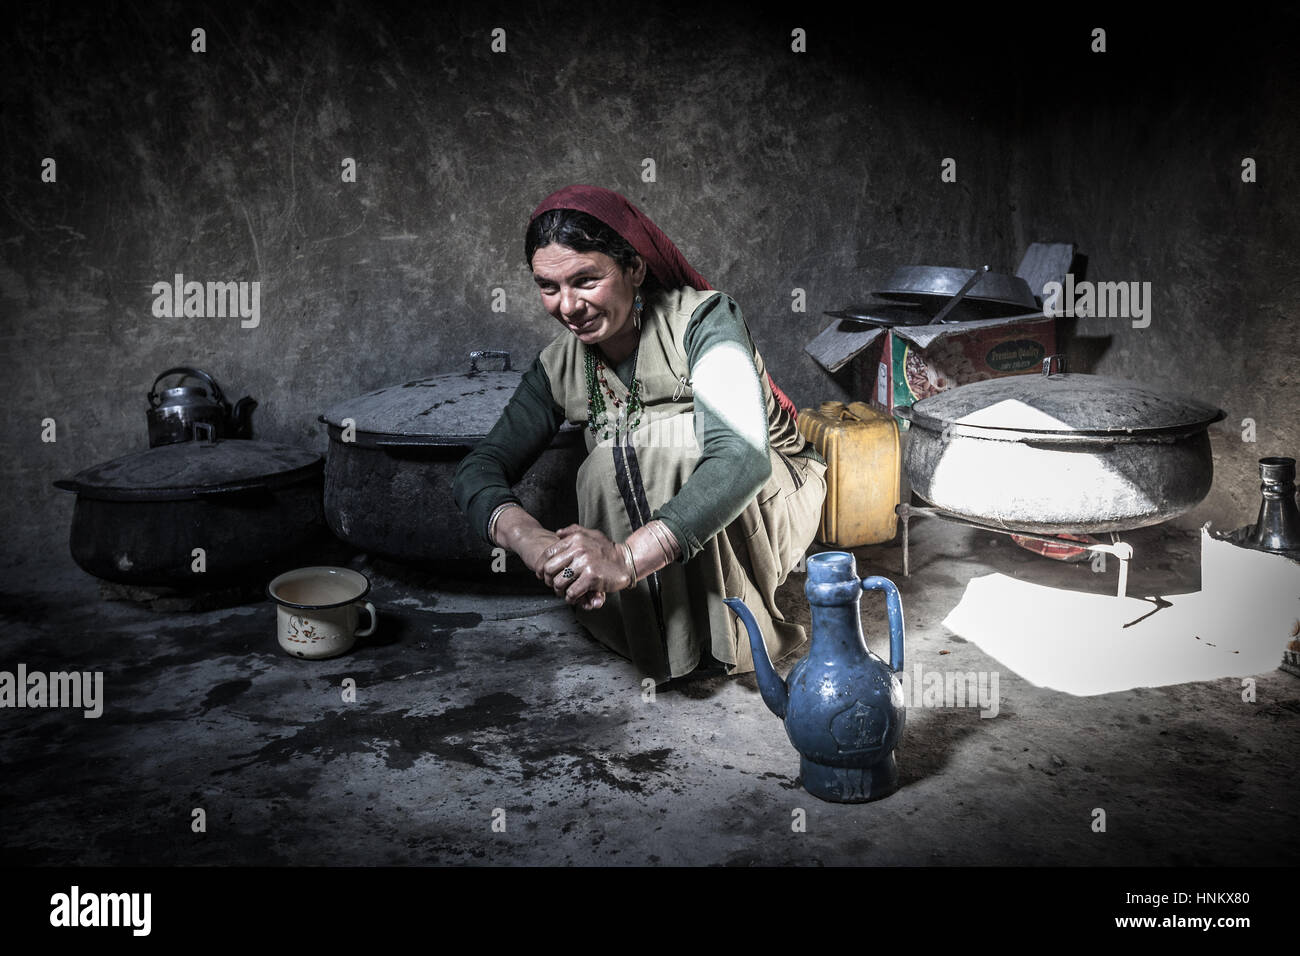 Afghanistan, Wakhan corridor,a woman is washing her hands in traditional clothes, seated on the ground in stoned kitchen. Stock Photo